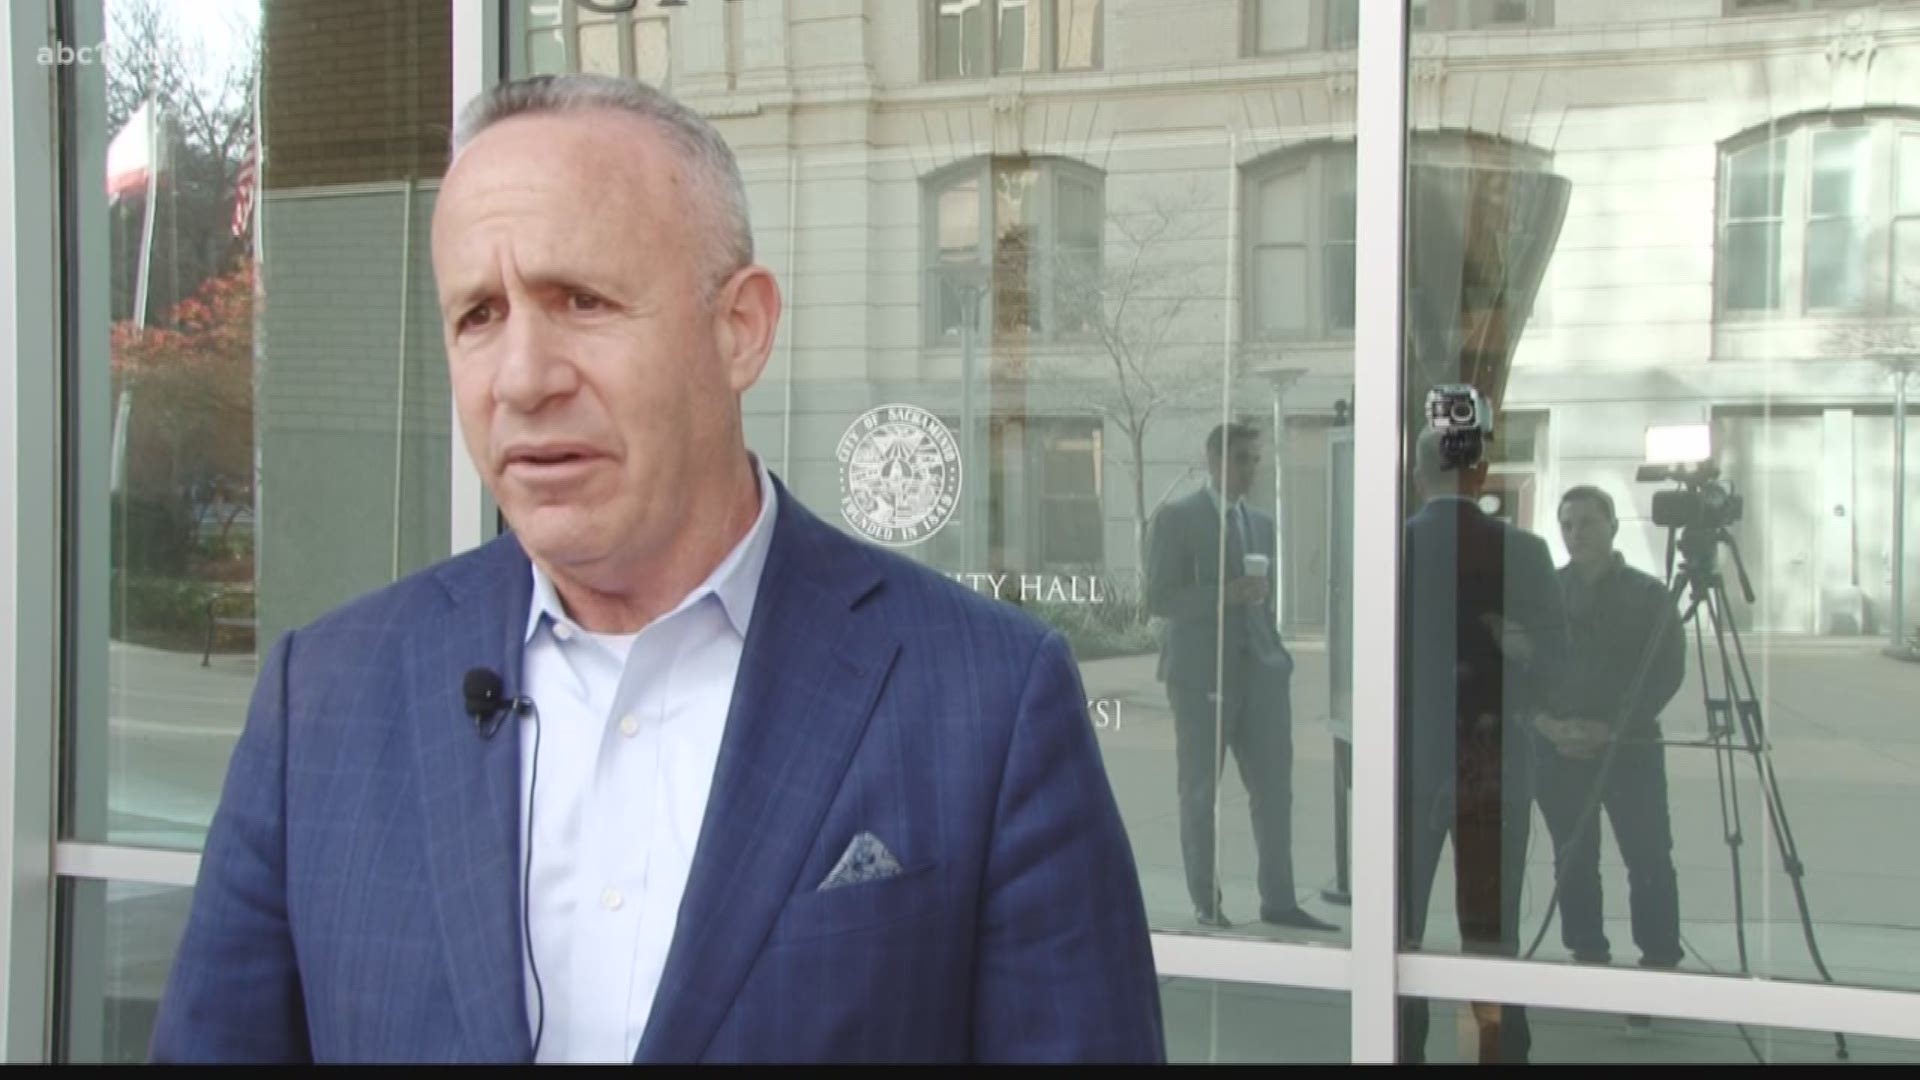 Sacramento's mayor is speaking out after comments made by the acting director of the United States Immigration and Customs Enforcement (ICE) that politicians upholding sanctuary city laws should be jailed.